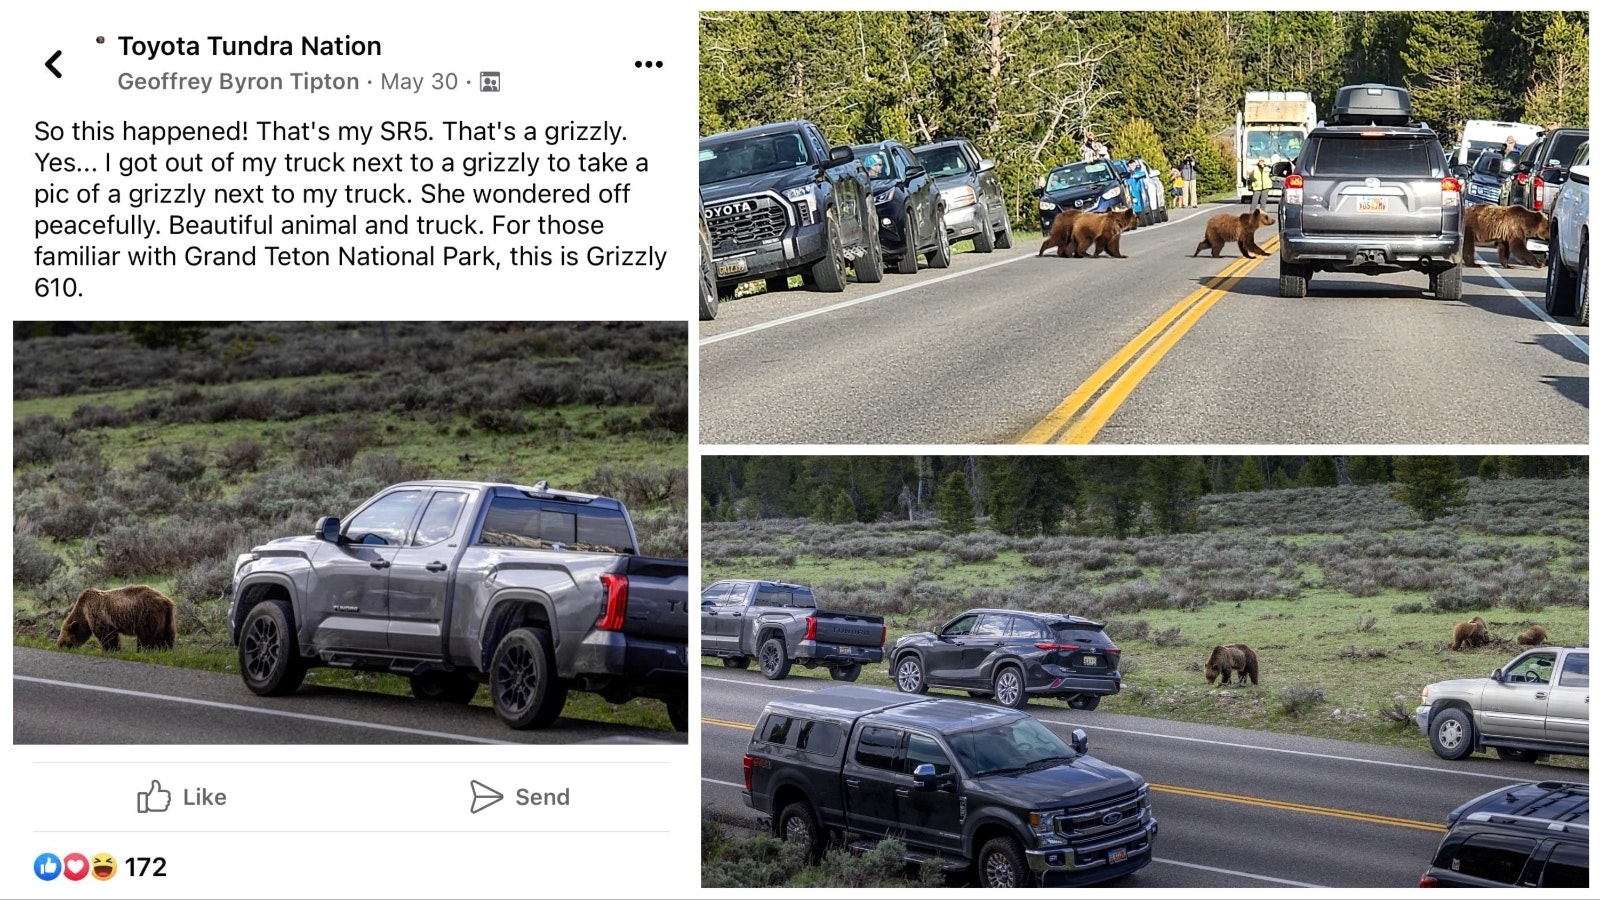 Geoffrey Tipton of Jackson said that a controversial photo of Teton Park’s Grizzly 610 next to his pickup was taken during a “bear jam” caused by 610 and her cubs, and numerous other people also got out of their vehicles.